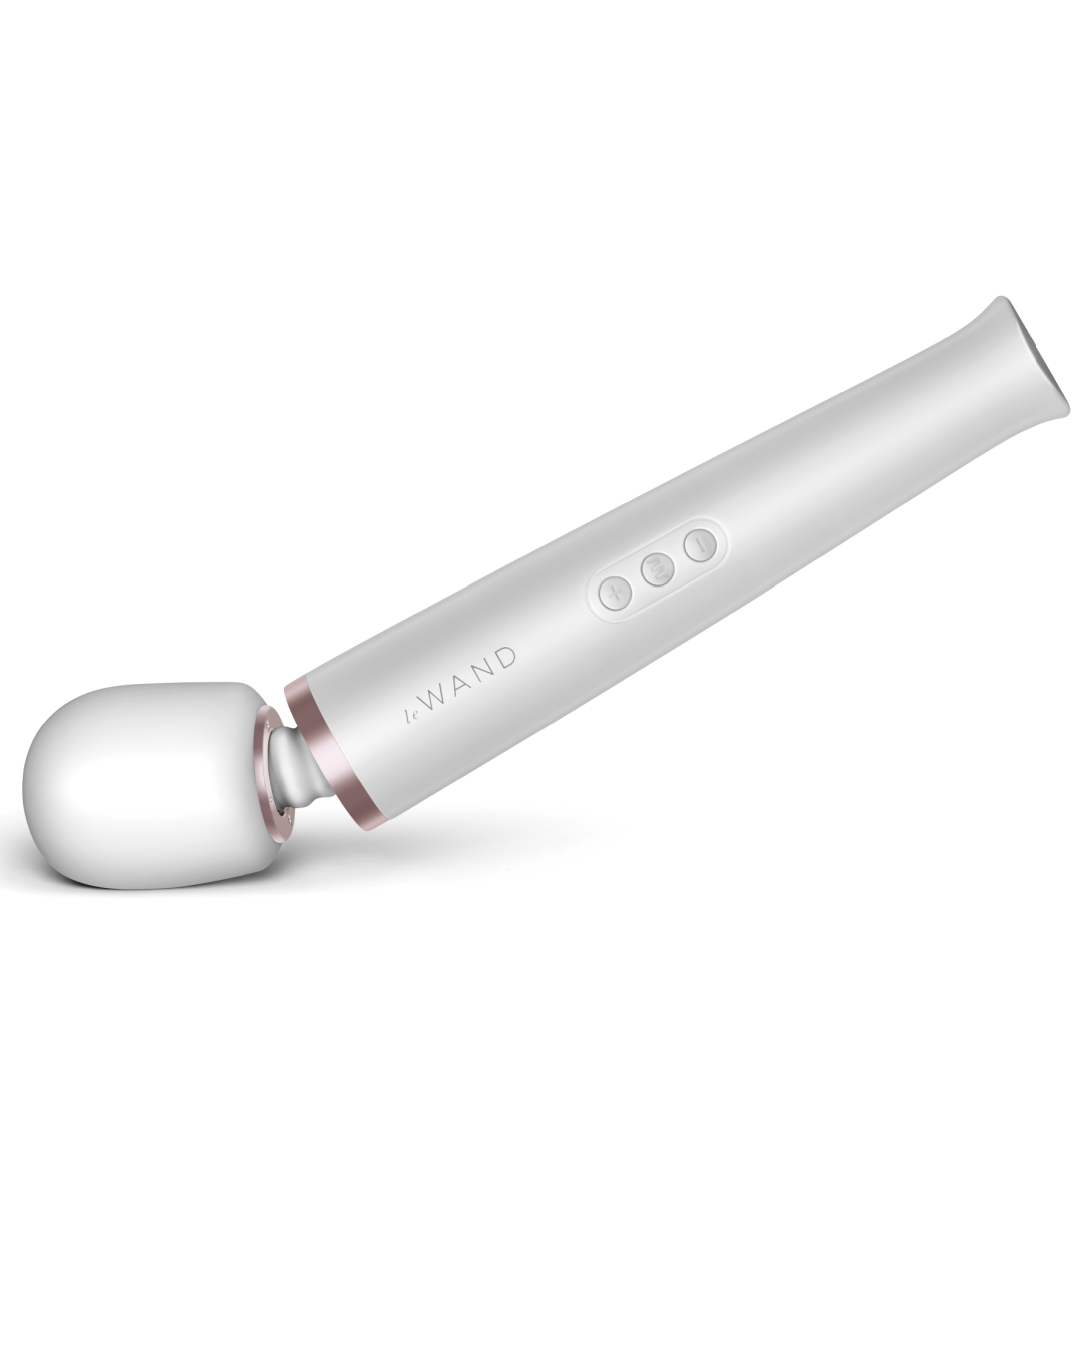 Le Wand Cordless Vibrating Massager - White with the head pressed to a white surface, showing the flexibility of the neck